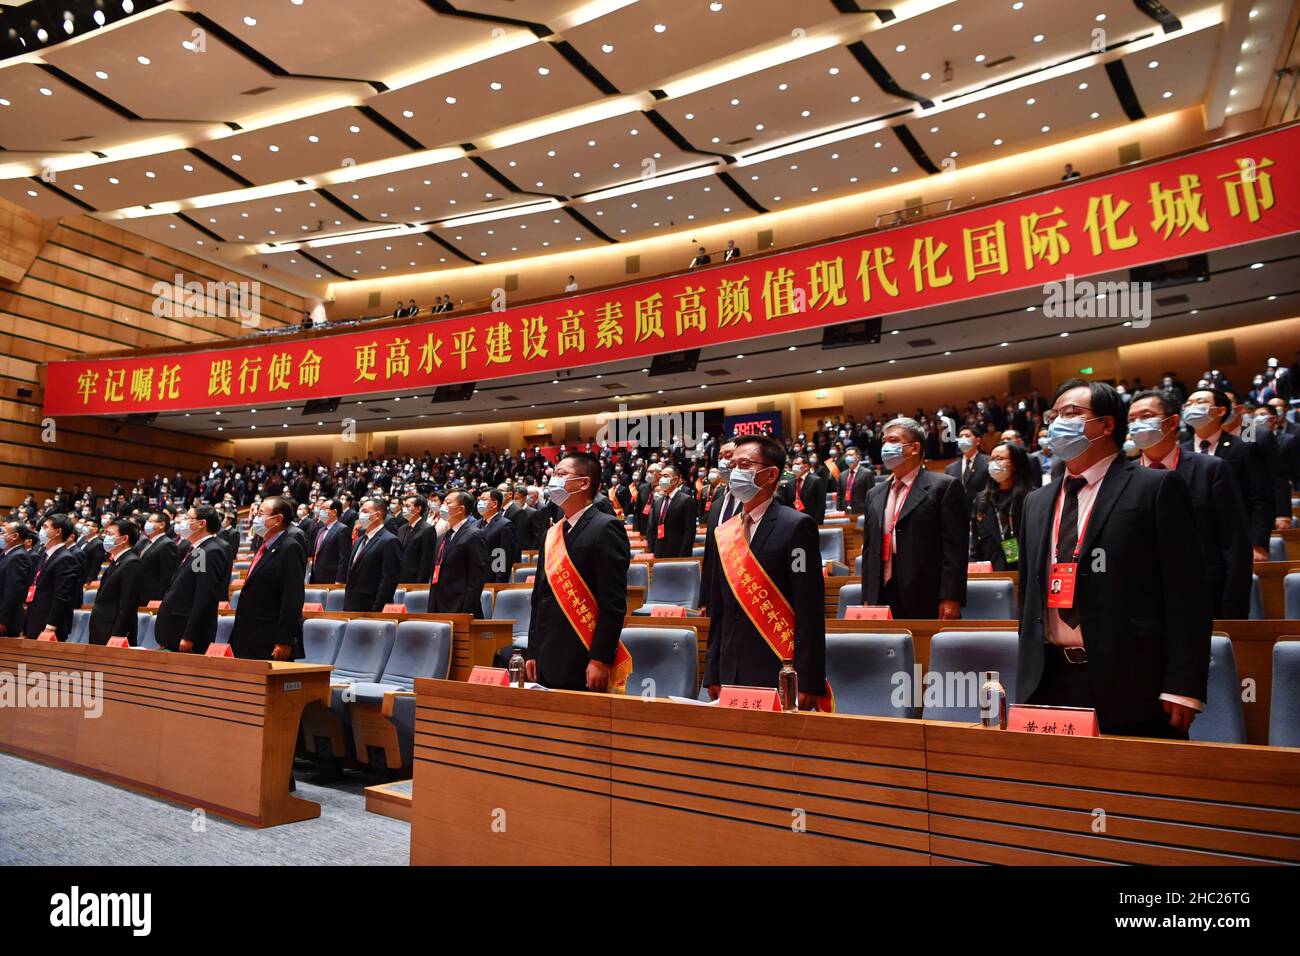 Xiamen, China's Fujian Province. 21st Dec, 2021. Representatives sing the national anthem at a gathering marking the 40th anniversary of the establishment of the Xiamen Special Economic Zone in Xiamen, southeast China's Fujian Province, Dec. 21, 2021. Credit: Jiang Kehong/Xinhua/Alamy Live News Stock Photo